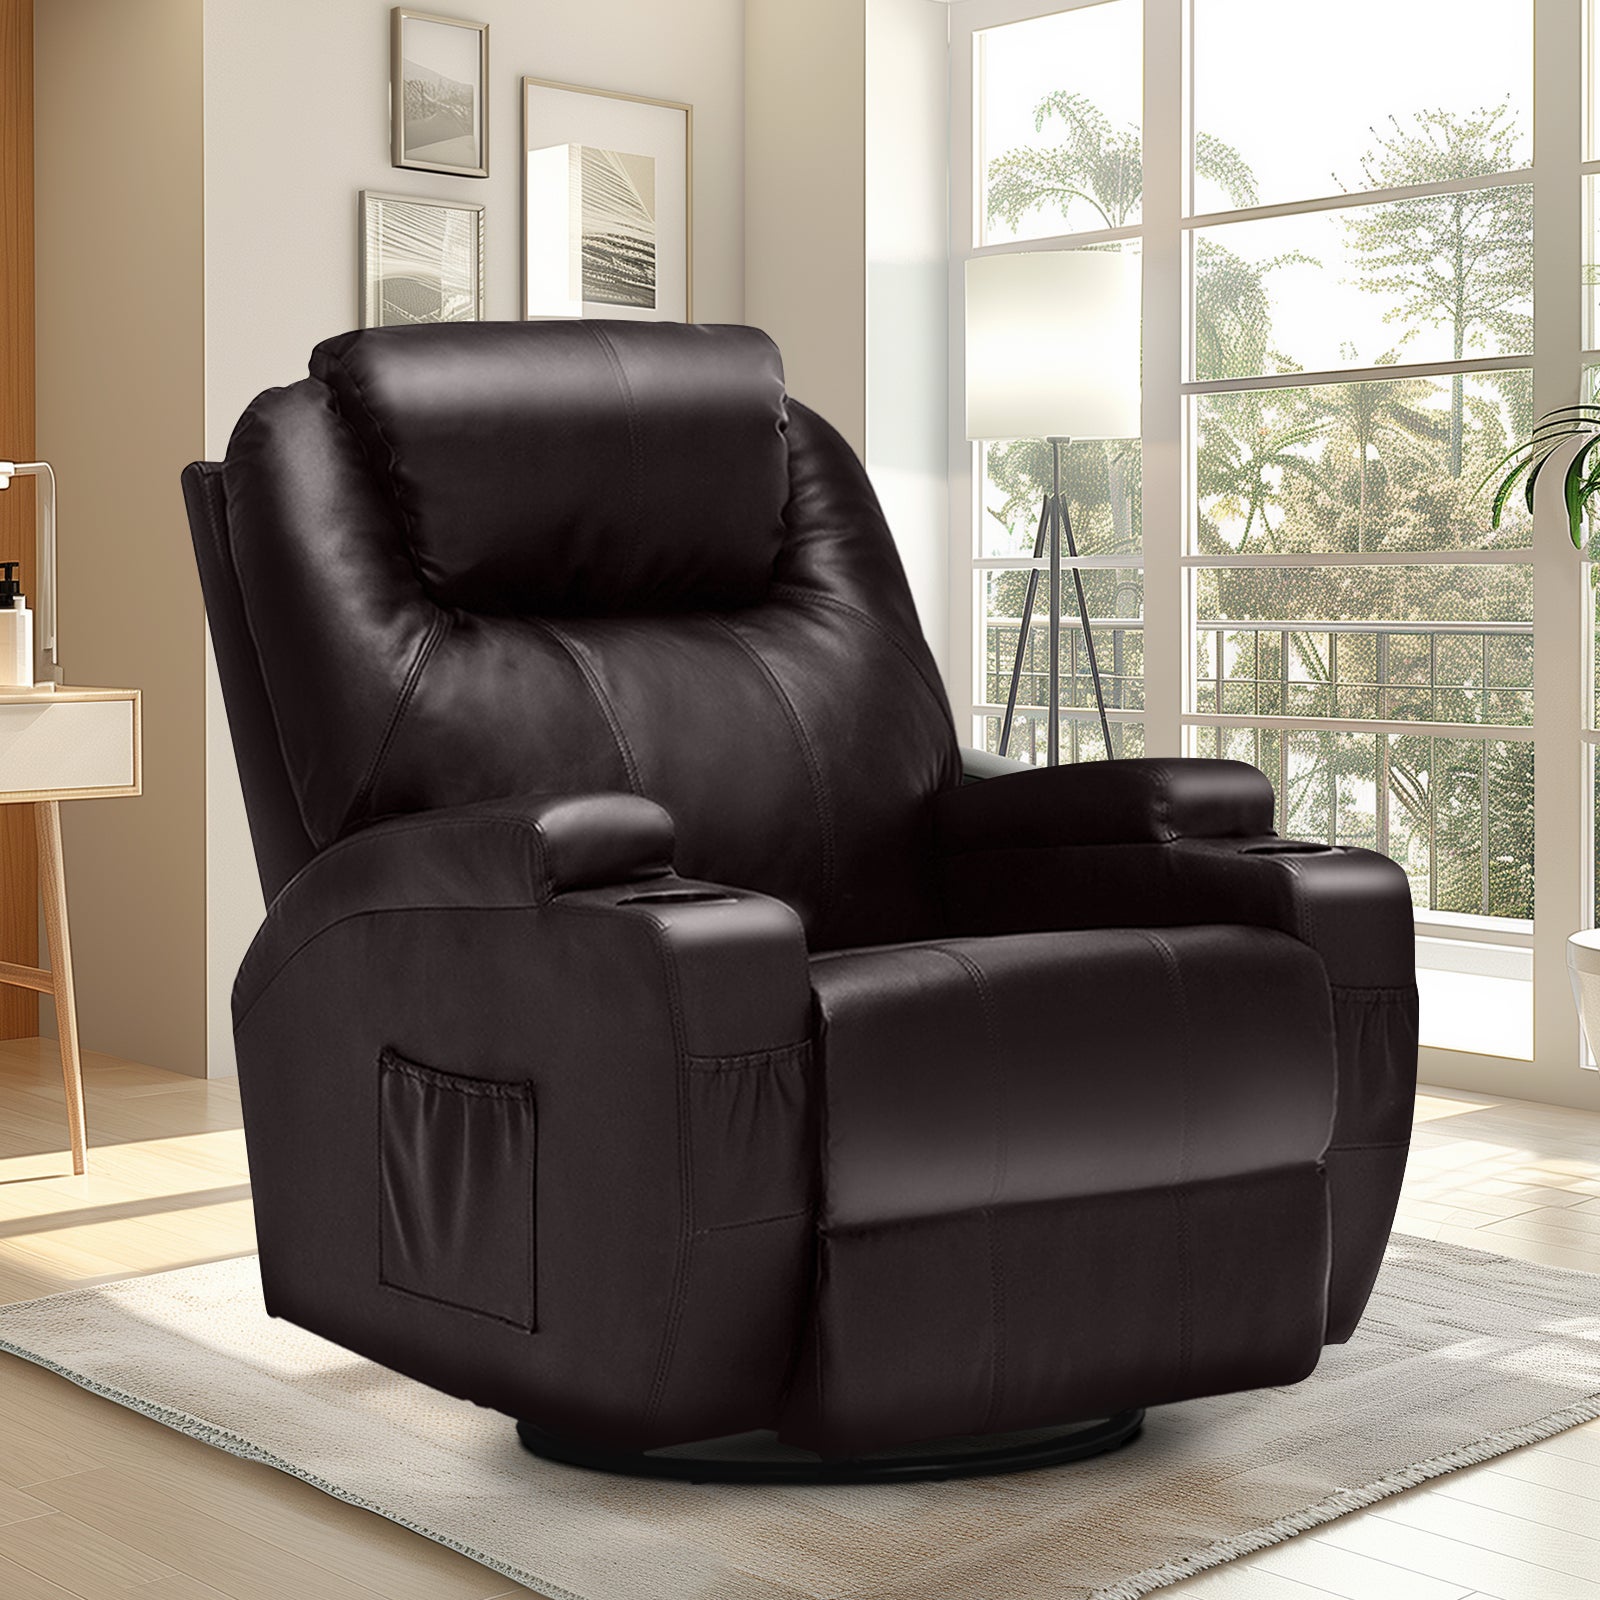 Advwin Recliner Chair Heated Massage Lift Chair PU Leather Lounge Sofa Couch Seat Rotate Base Brown